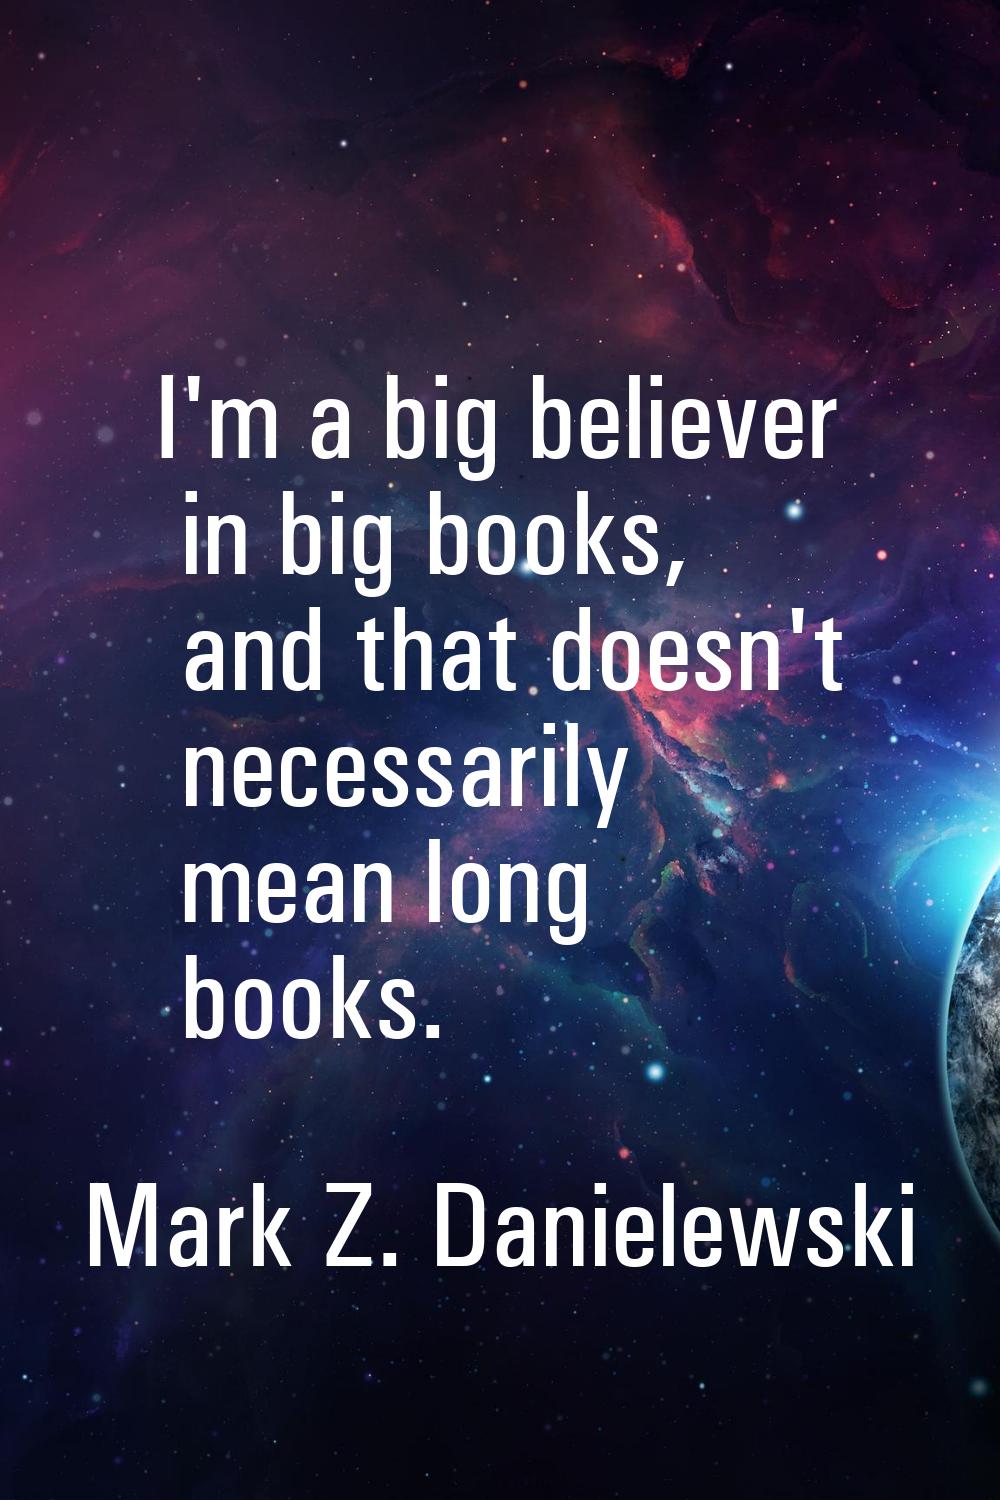 I'm a big believer in big books, and that doesn't necessarily mean long books.